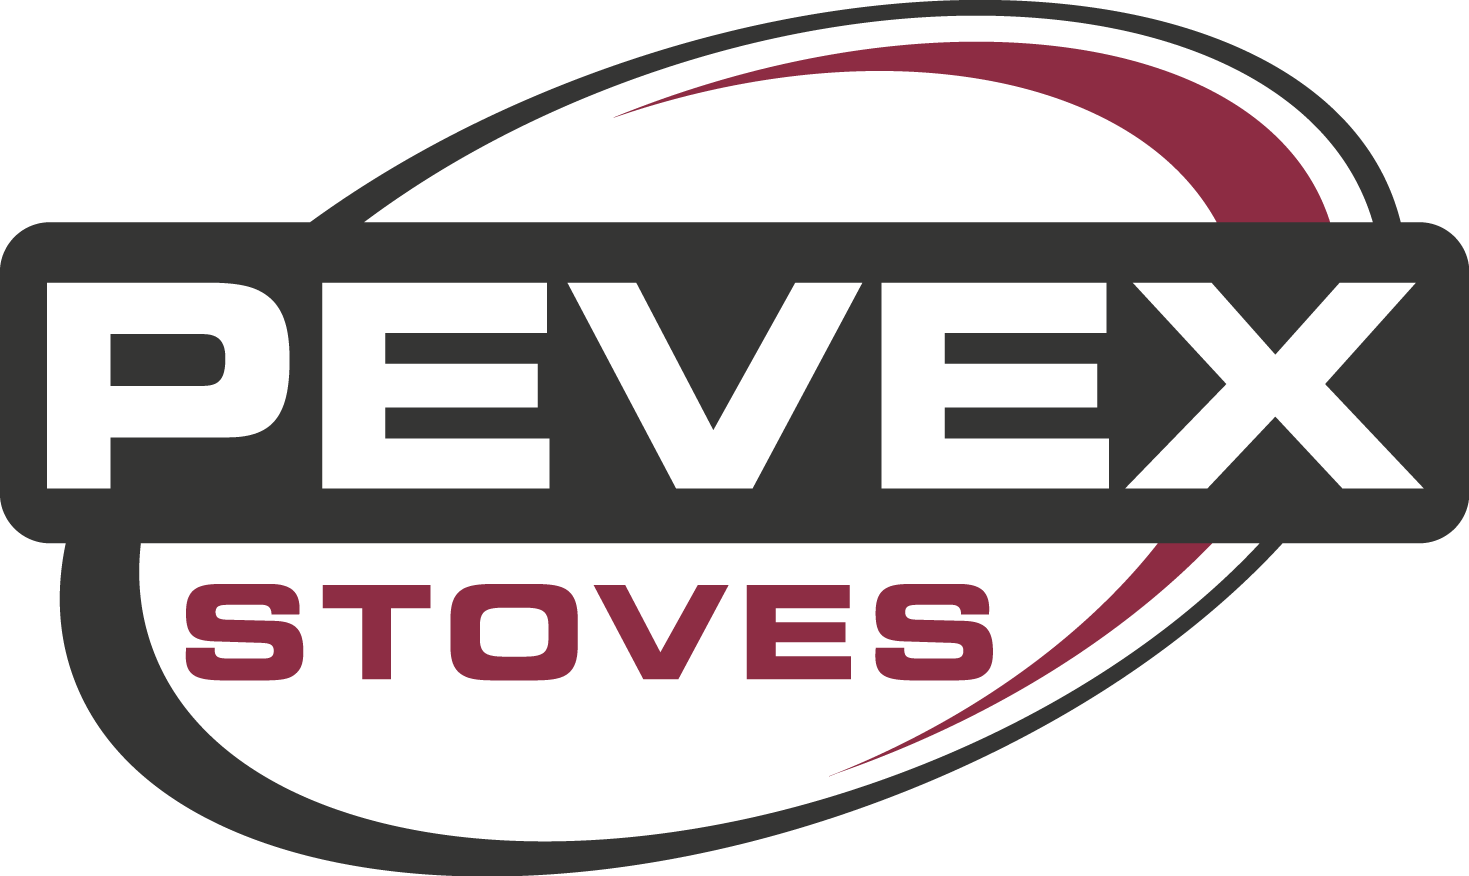 Pevex Stoves Spare Parts